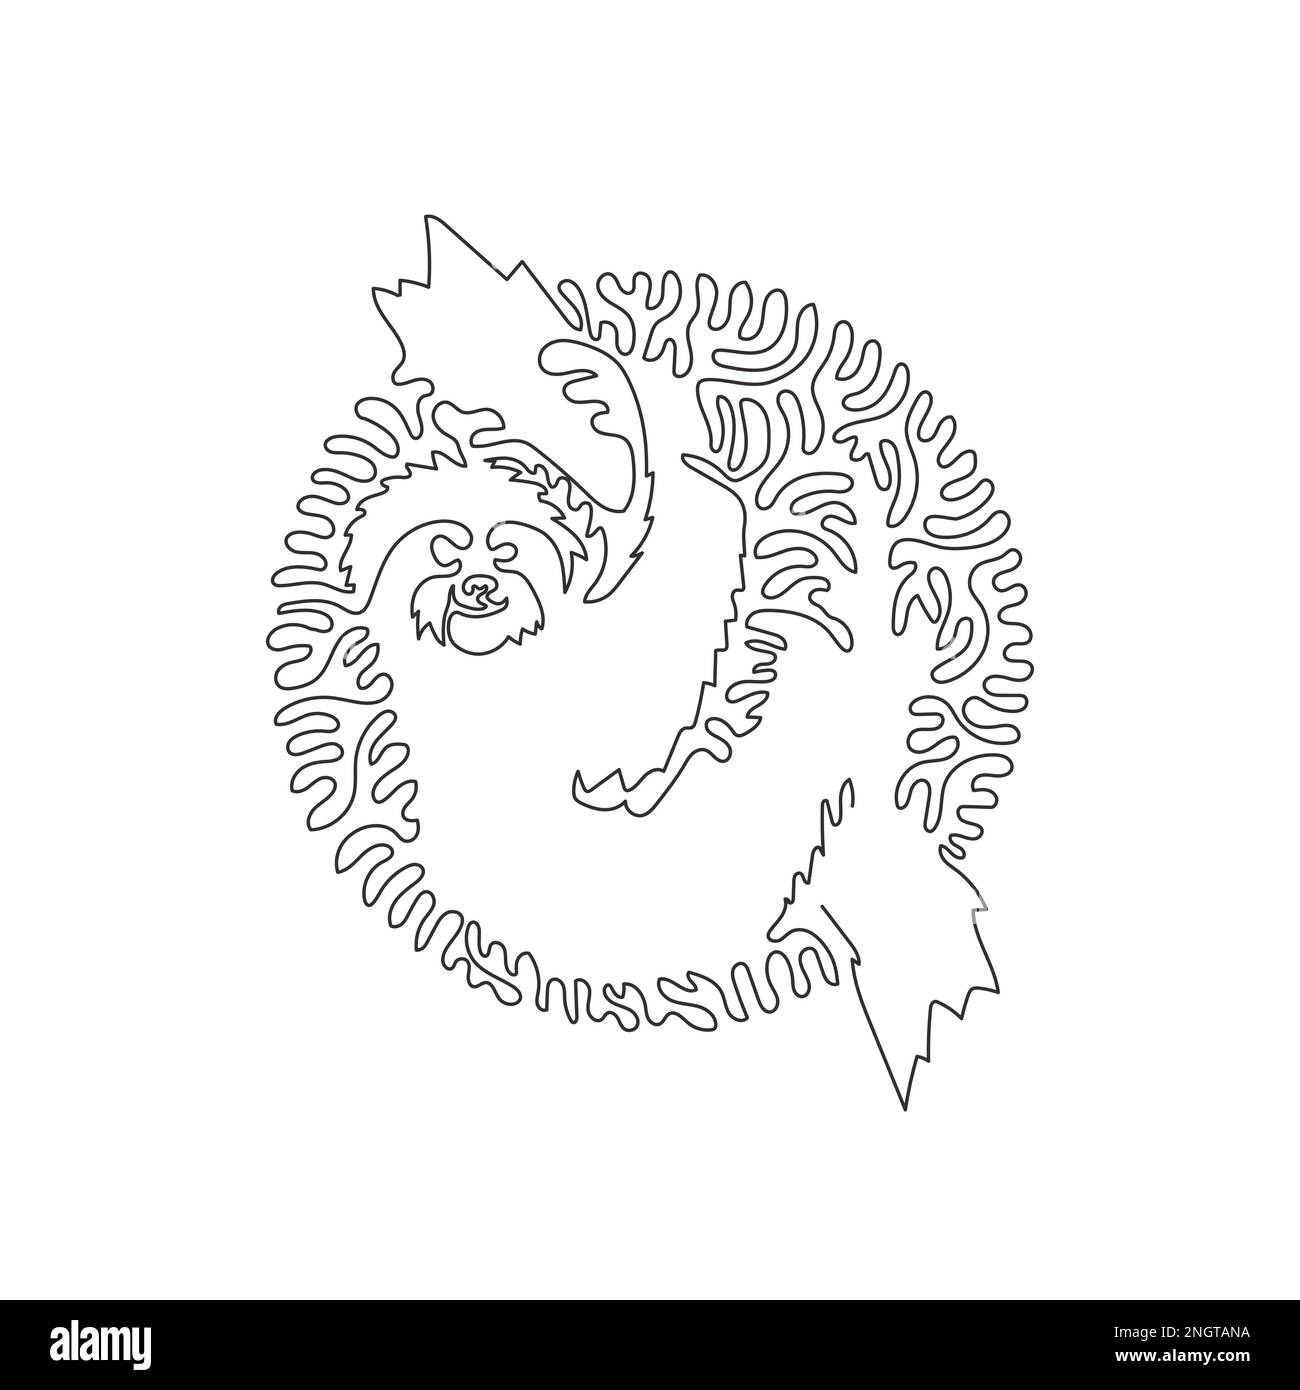 Single one line drawing of sloth tree dwelling mammal abstract art. Continuous line draw graphic vector illustration of adorable sloth for icon Stock Vector